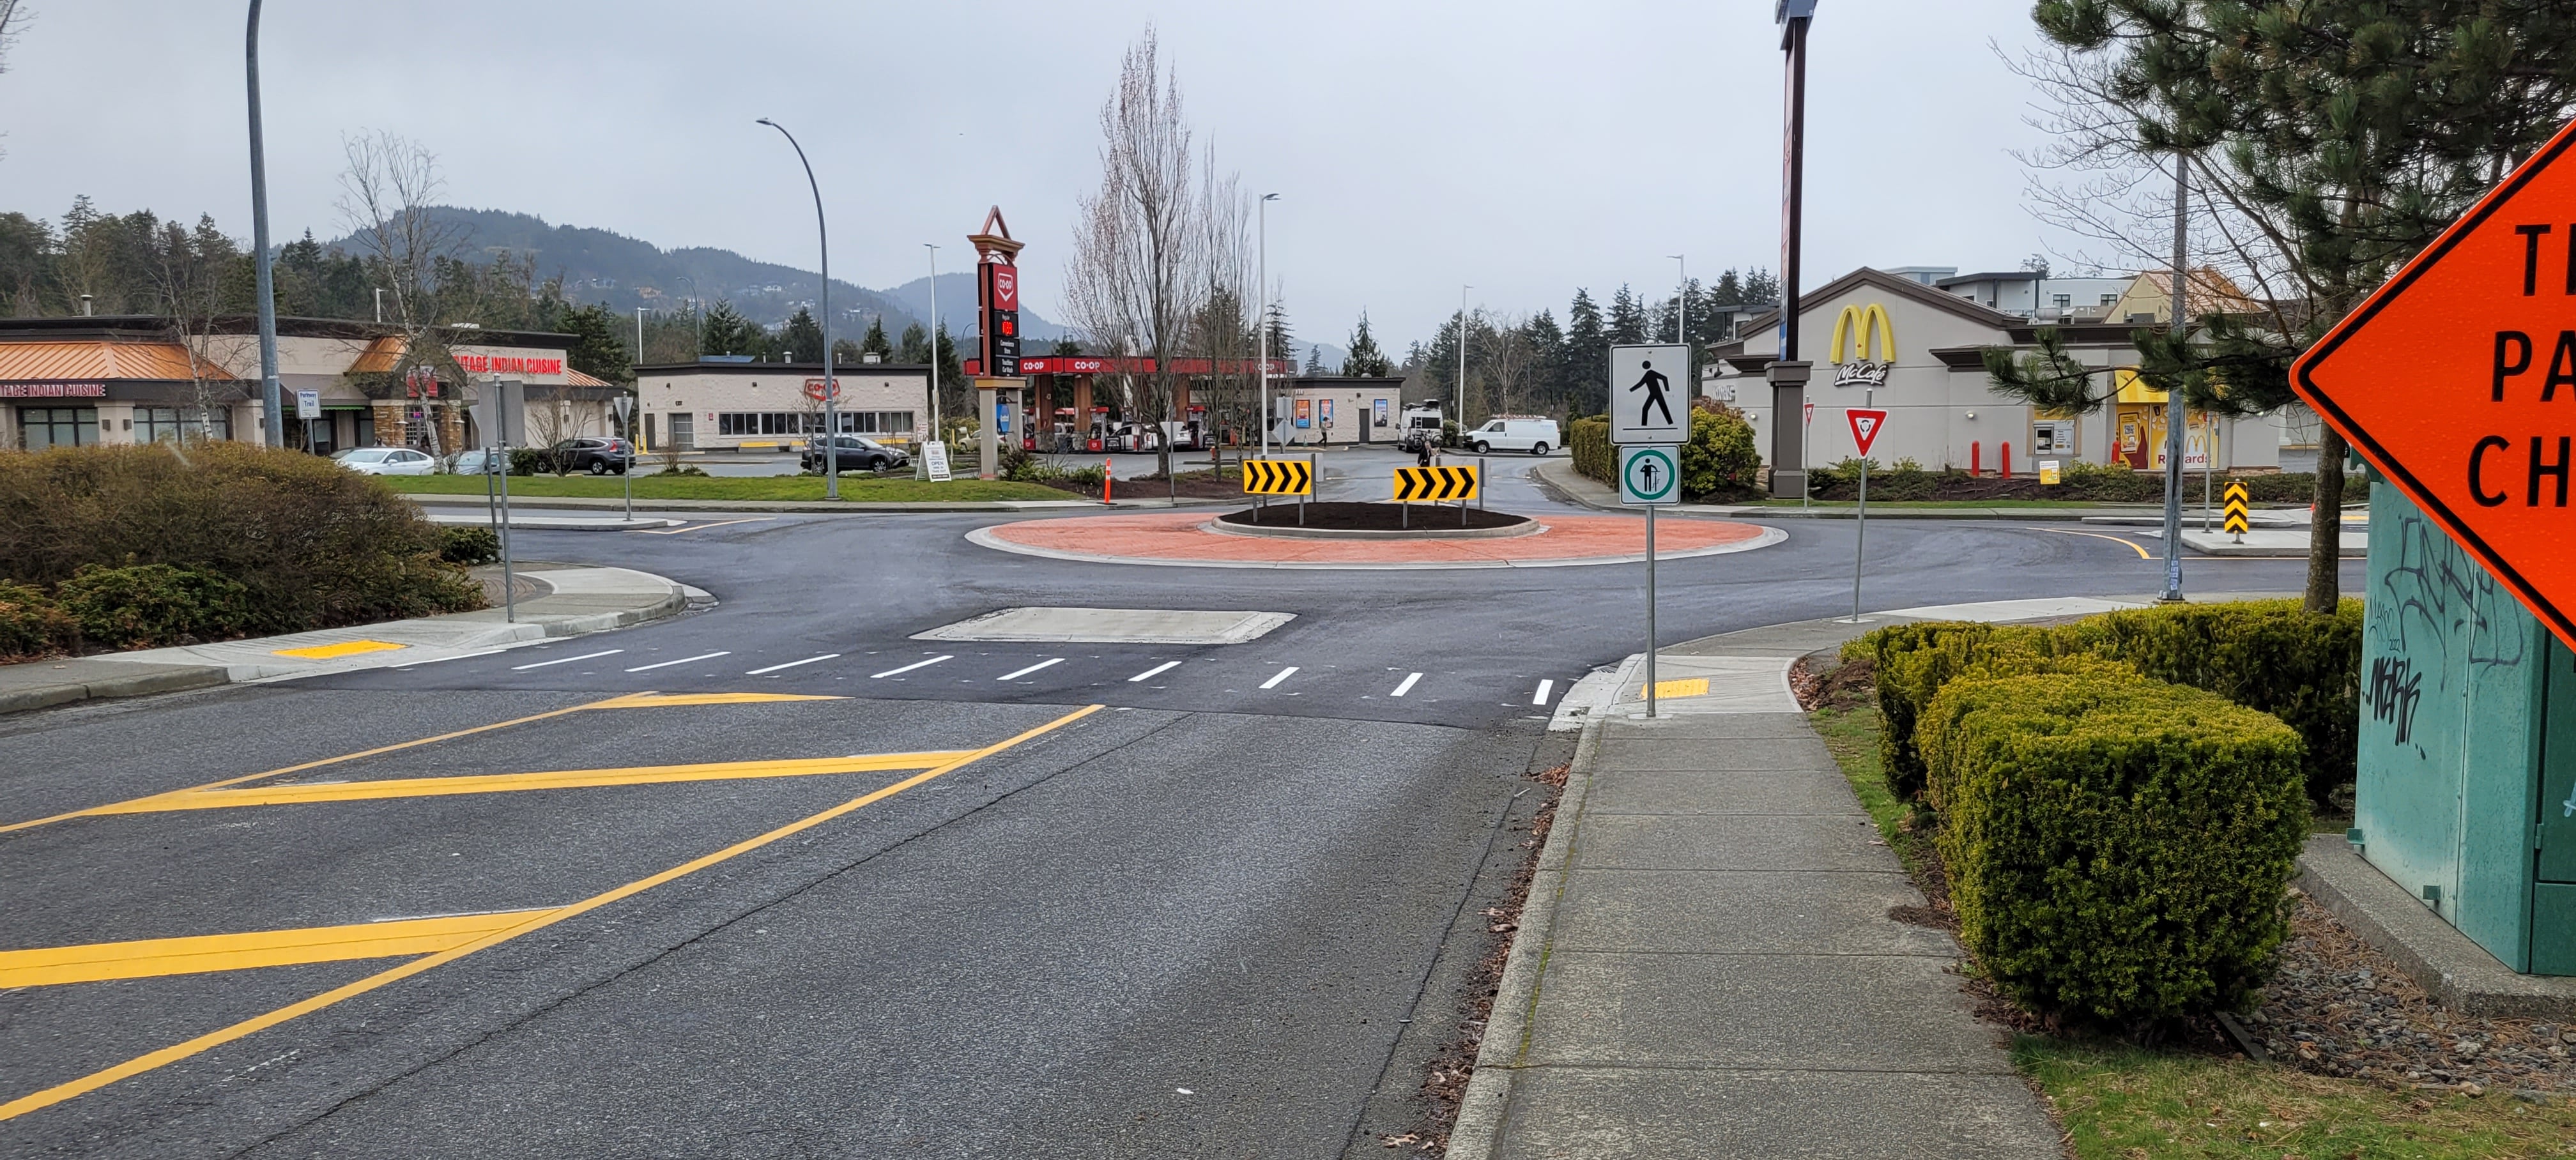 New Mary Ellen Drive Roundabout Is Already In Use (Strong Towns Nanaimo)